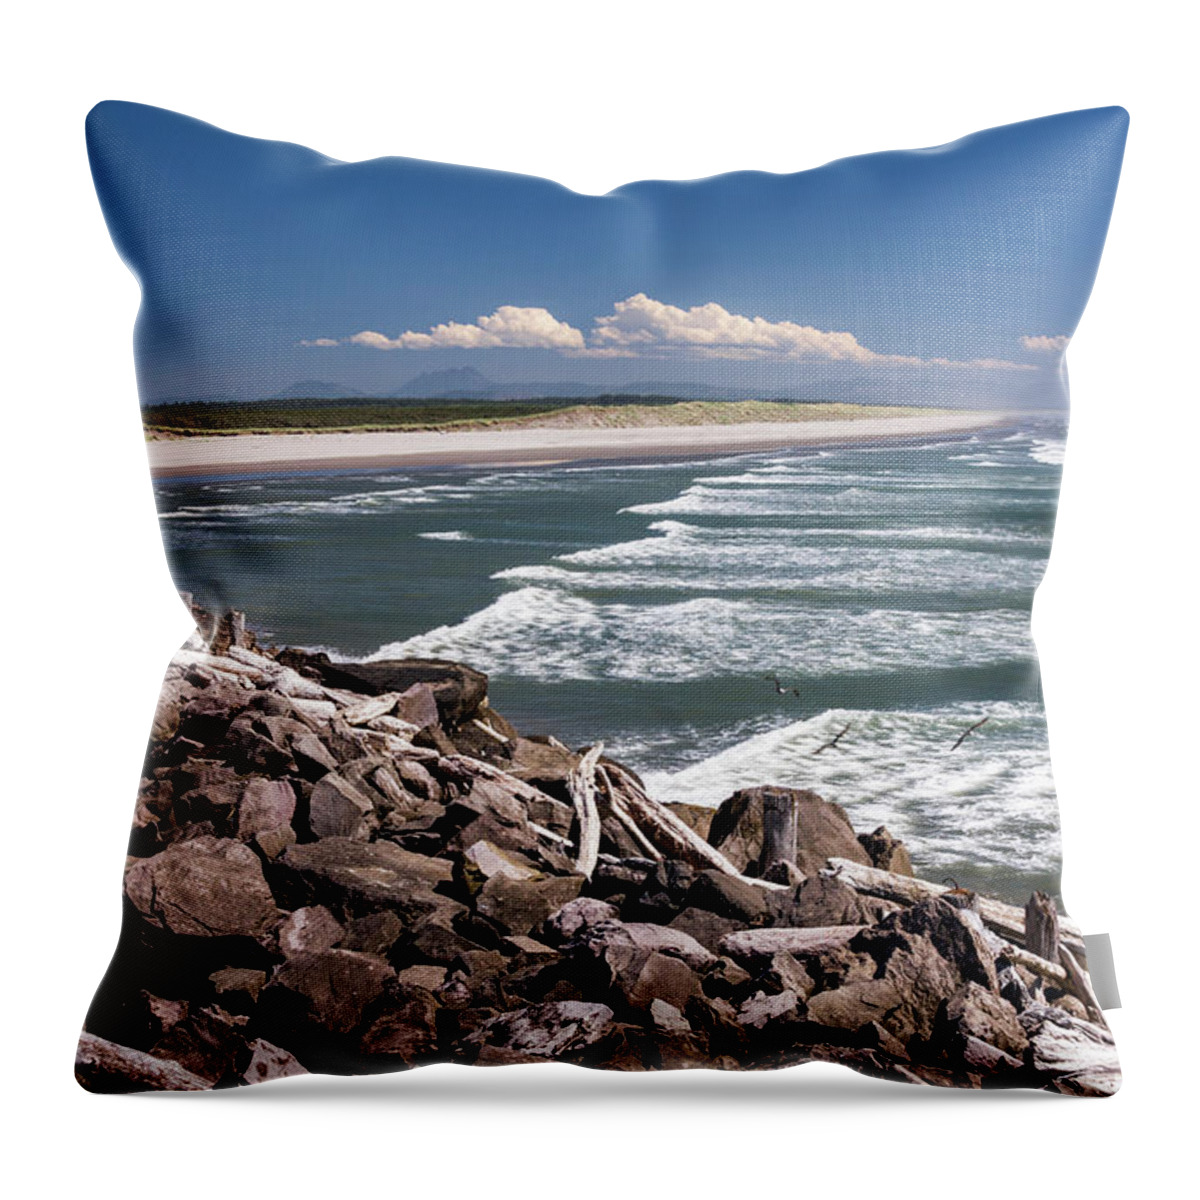 Afternoon Throw Pillow featuring the photograph South Jetty 2 by Albert Seger